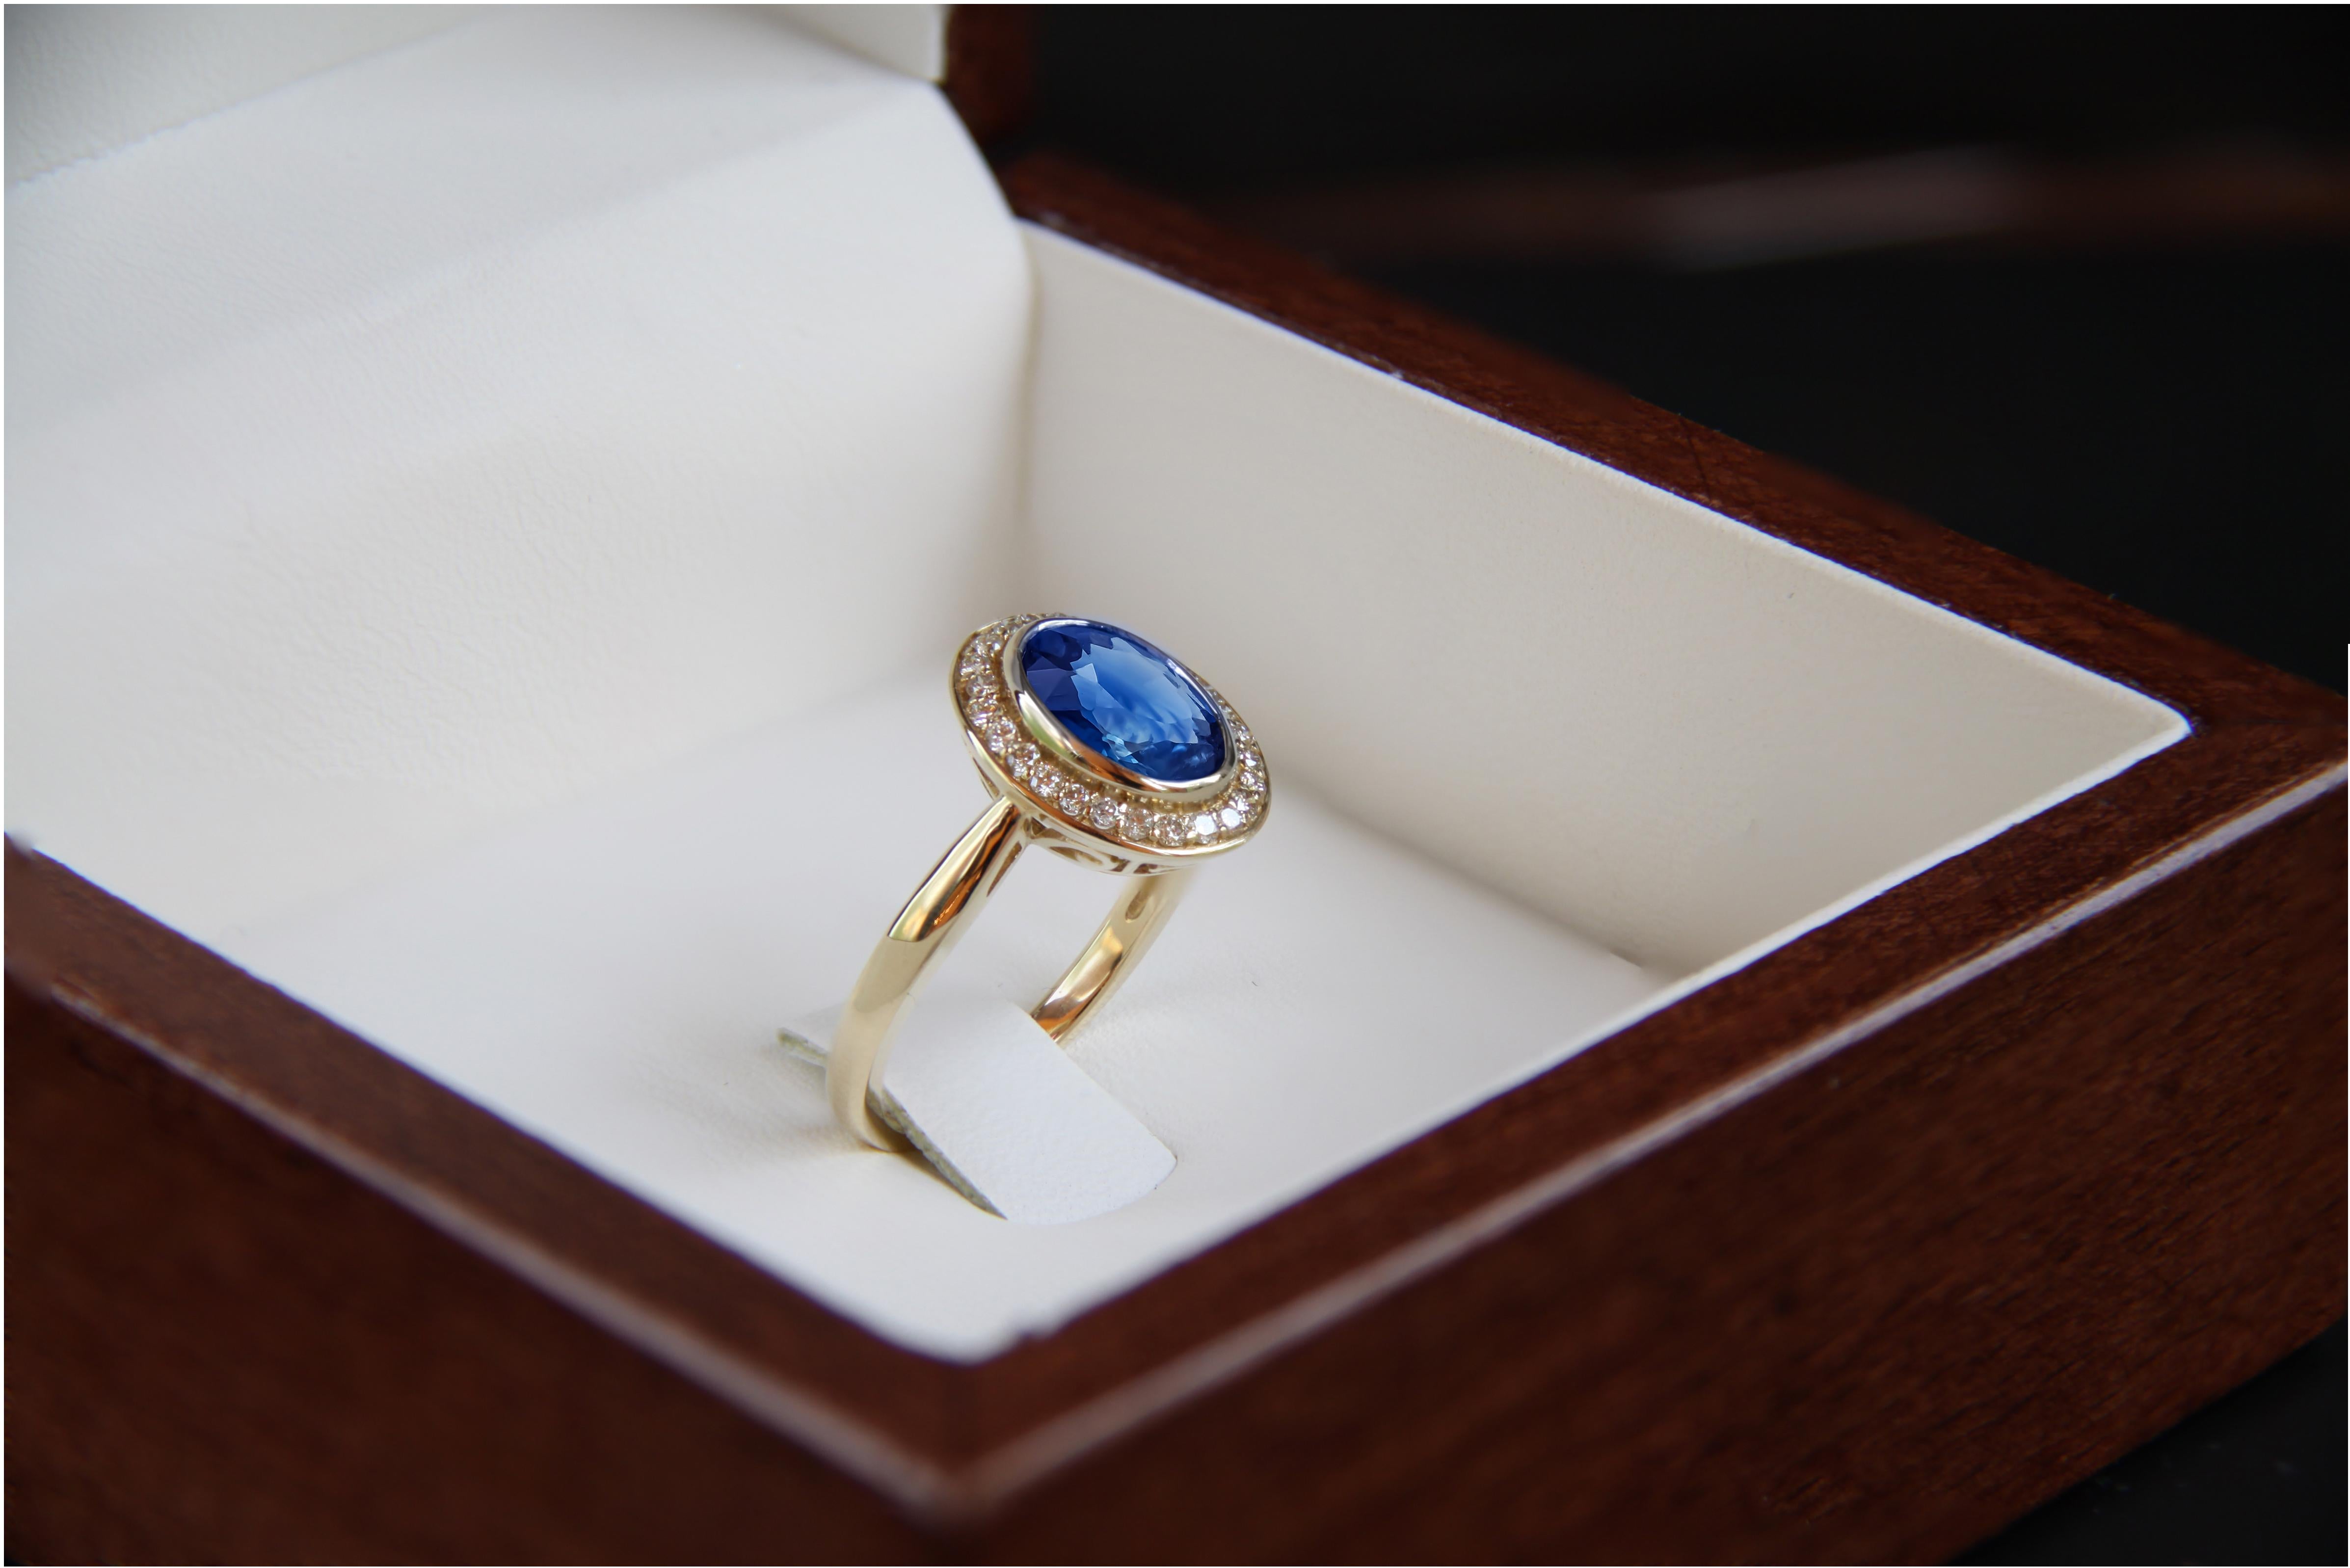 For Sale:  Sapphire and diamonds 14k gold ring. 4